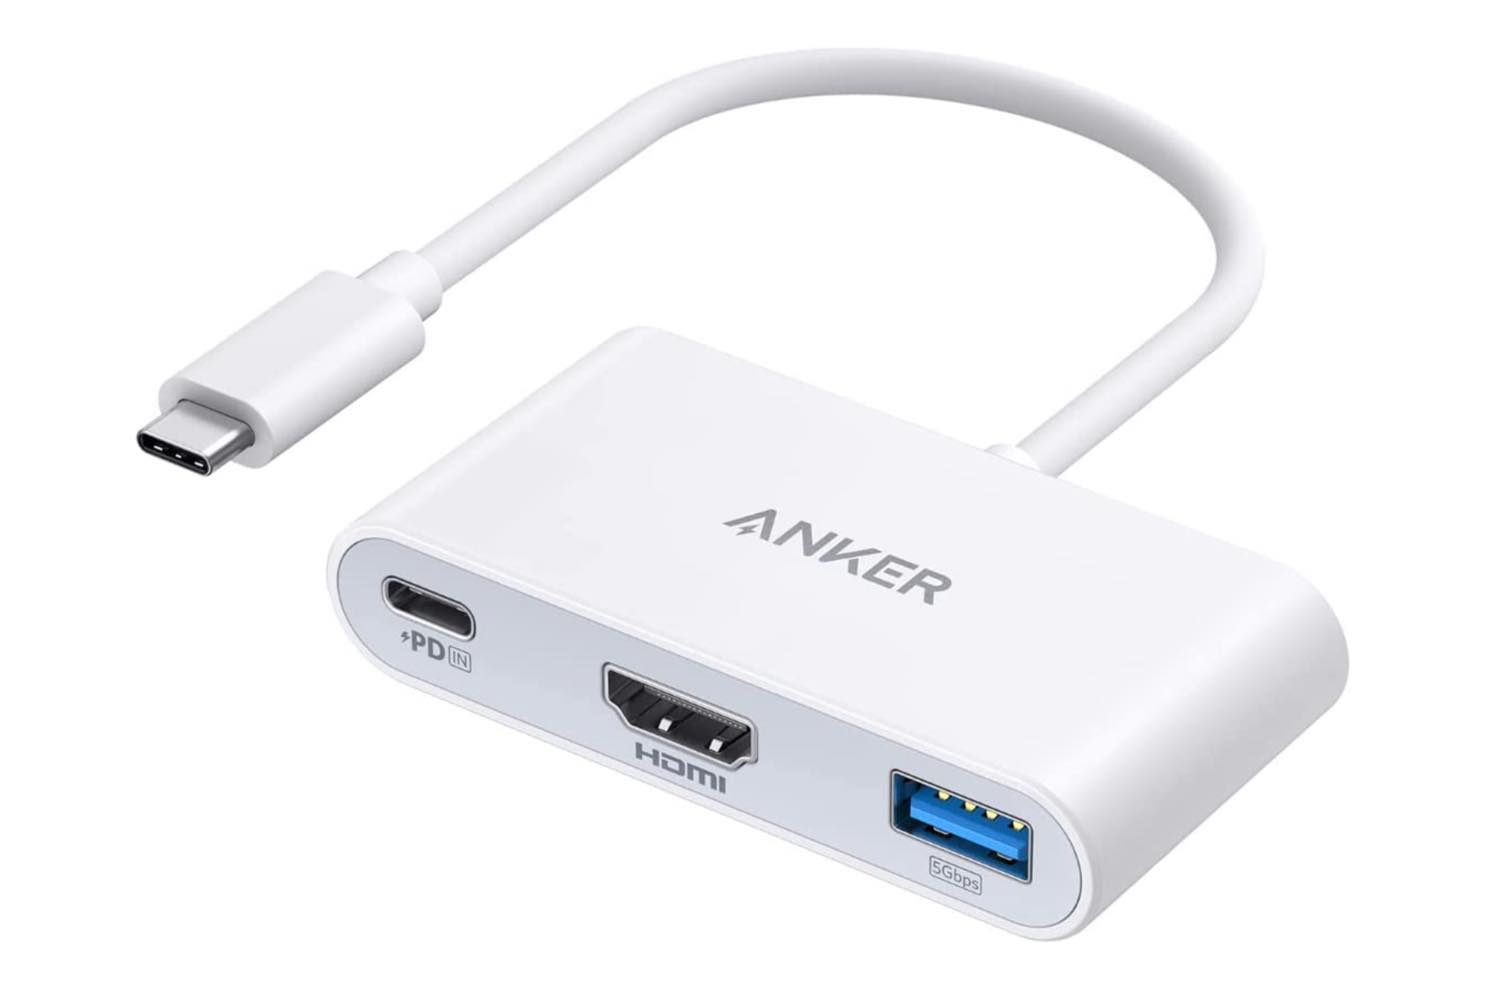 Anker、｢Anker PowerExpand 3-in-1 USB-C ハブ｣のホワイトモデルを発売 − 初回200個限定で20％オフに